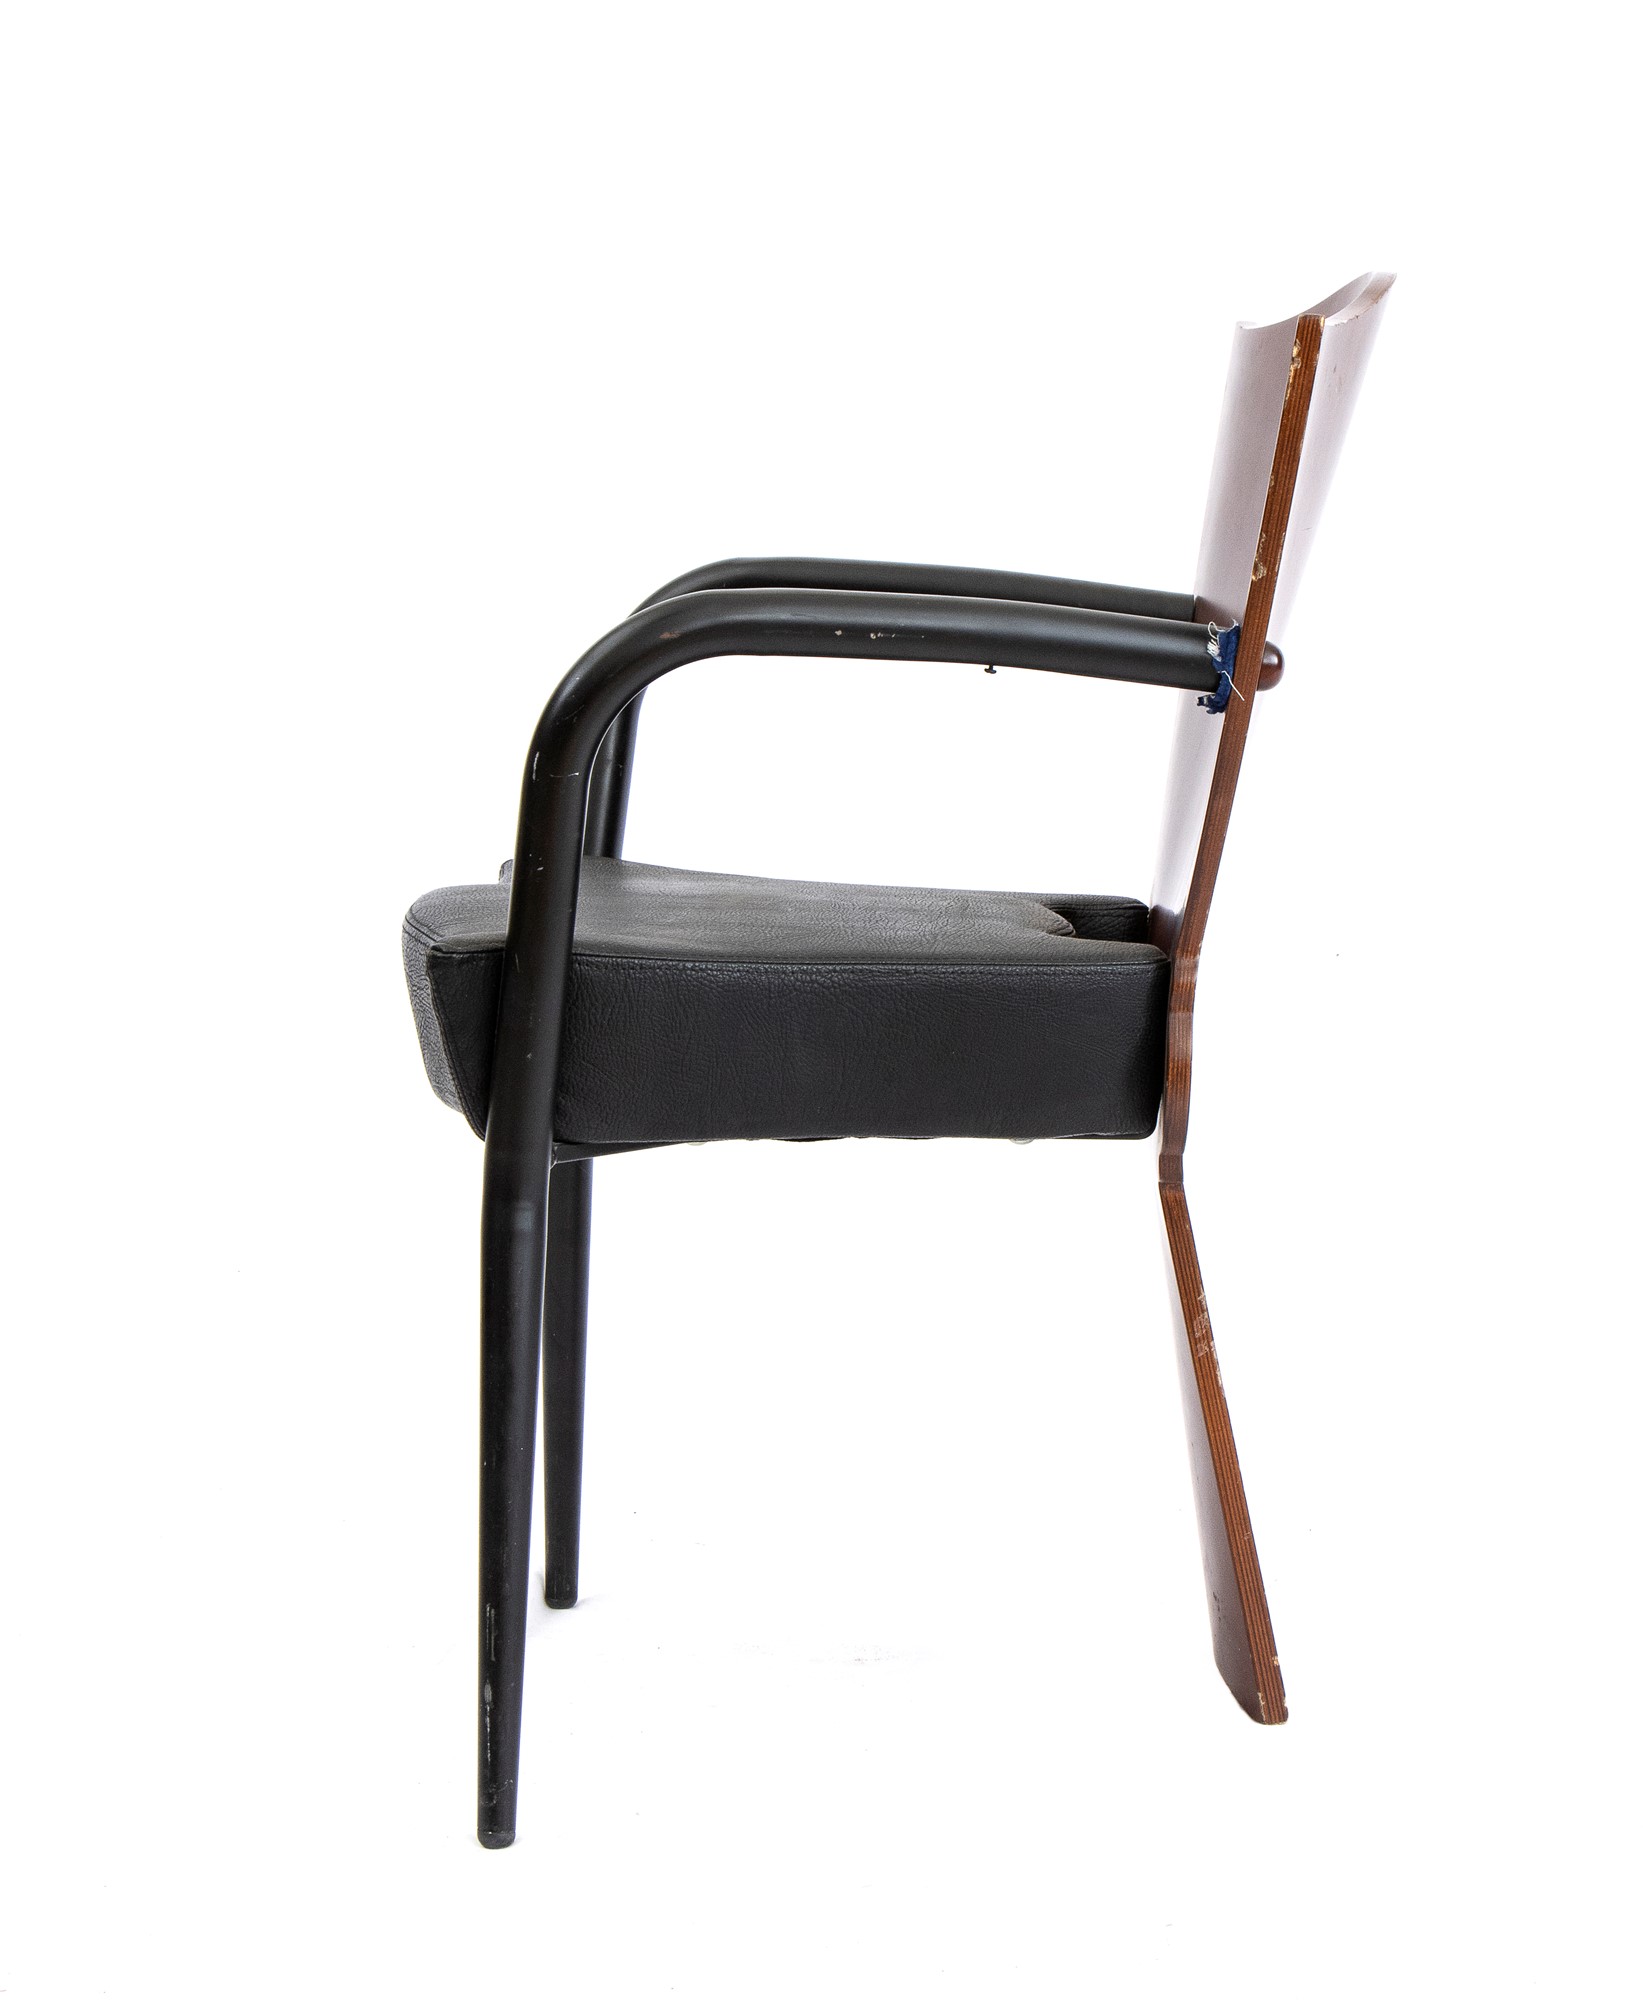 Four chairs mod. Dalami - Image 12 of 15